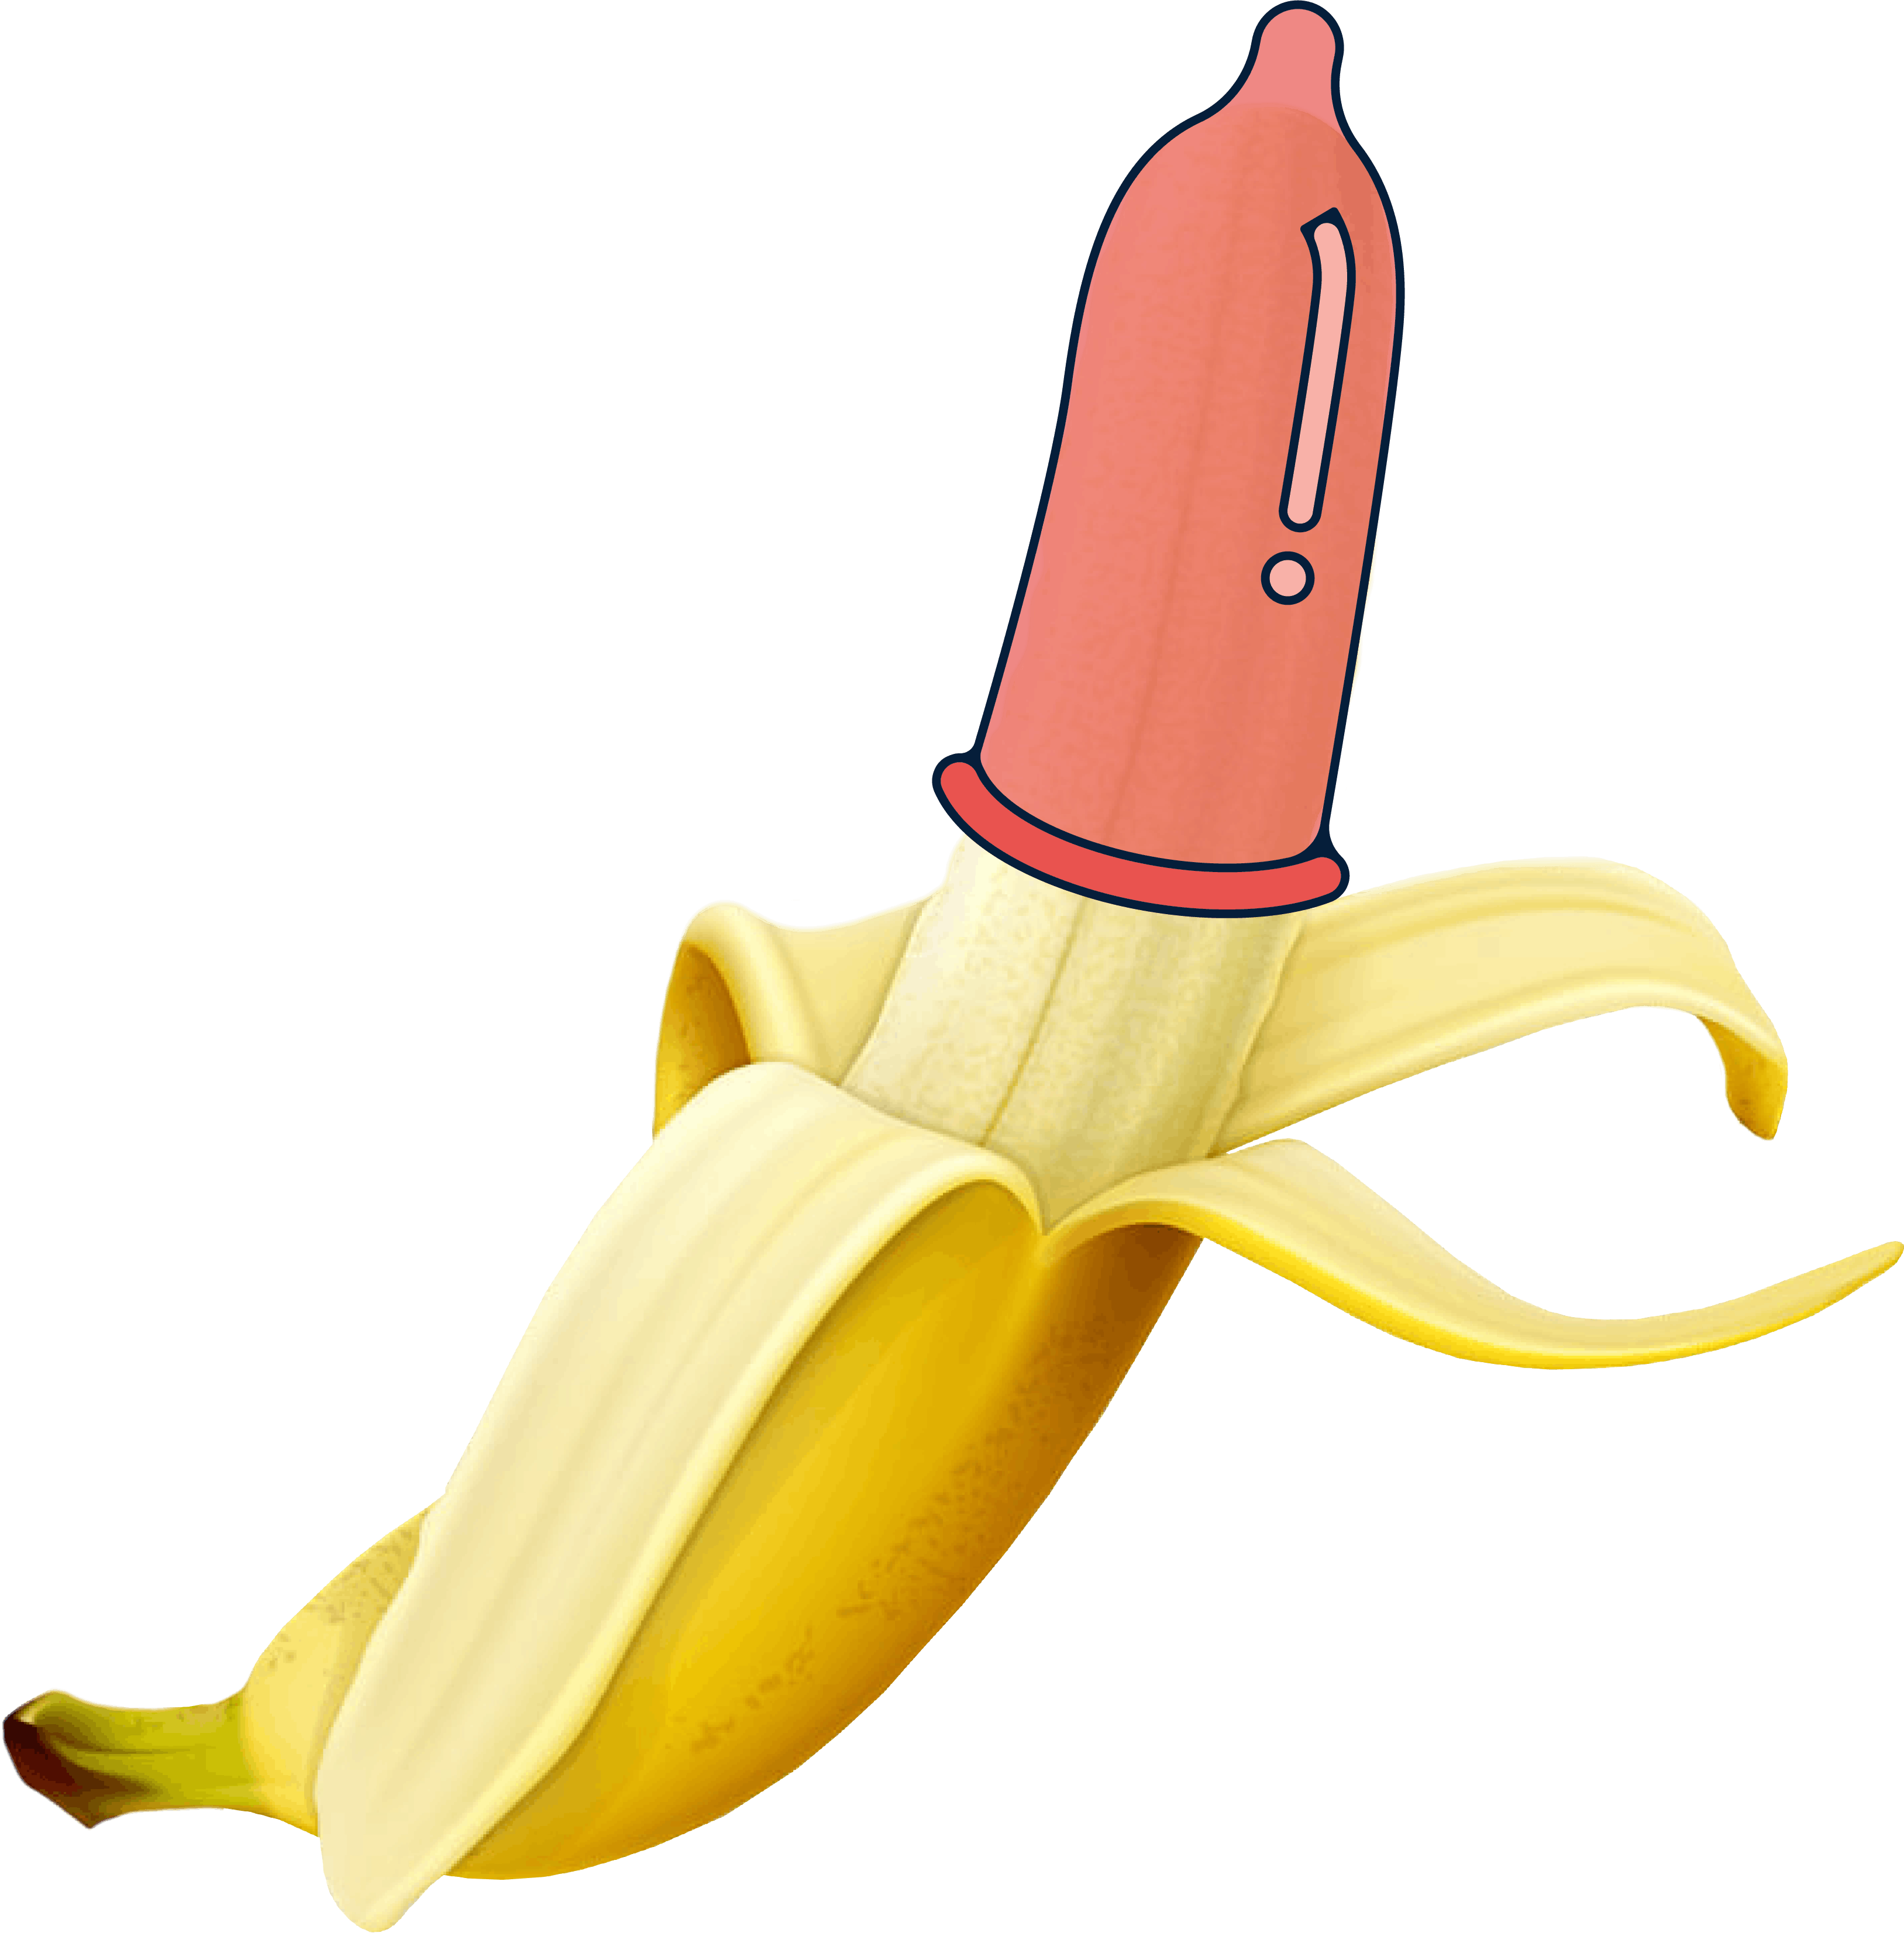 A banana covered by a condom, contraception, sex education, birth control 